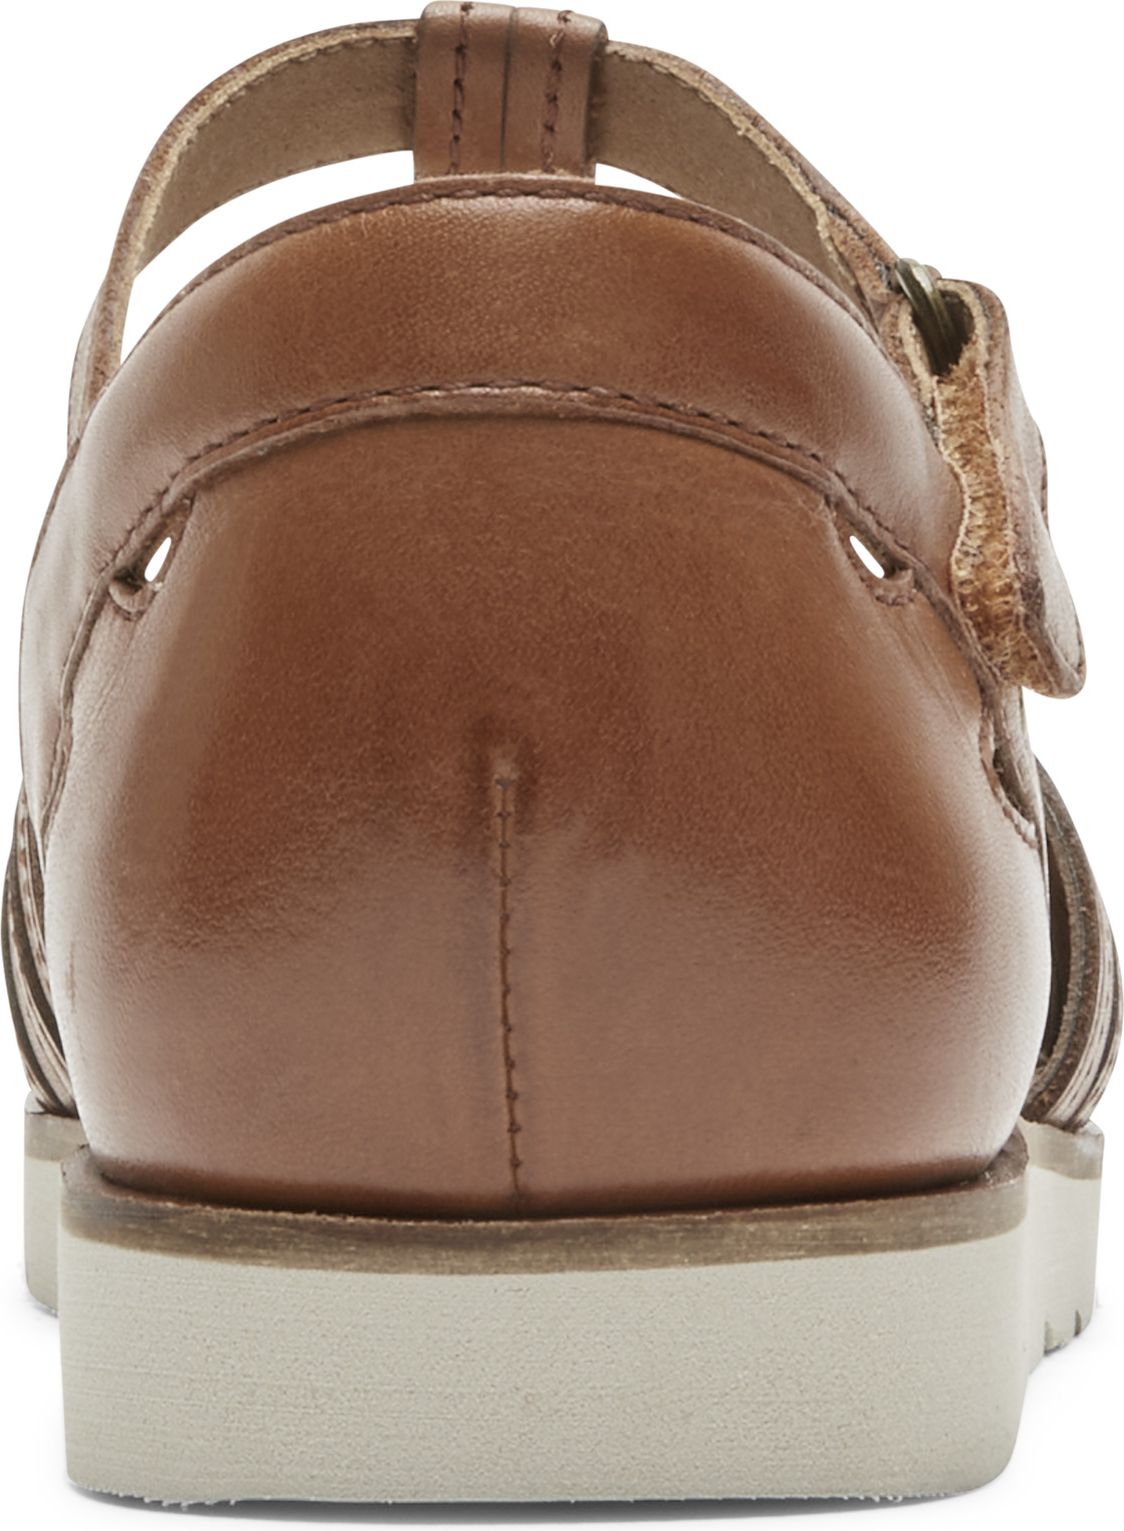 Cobb Hill Shoes Laci Fisherman Brown - Wide